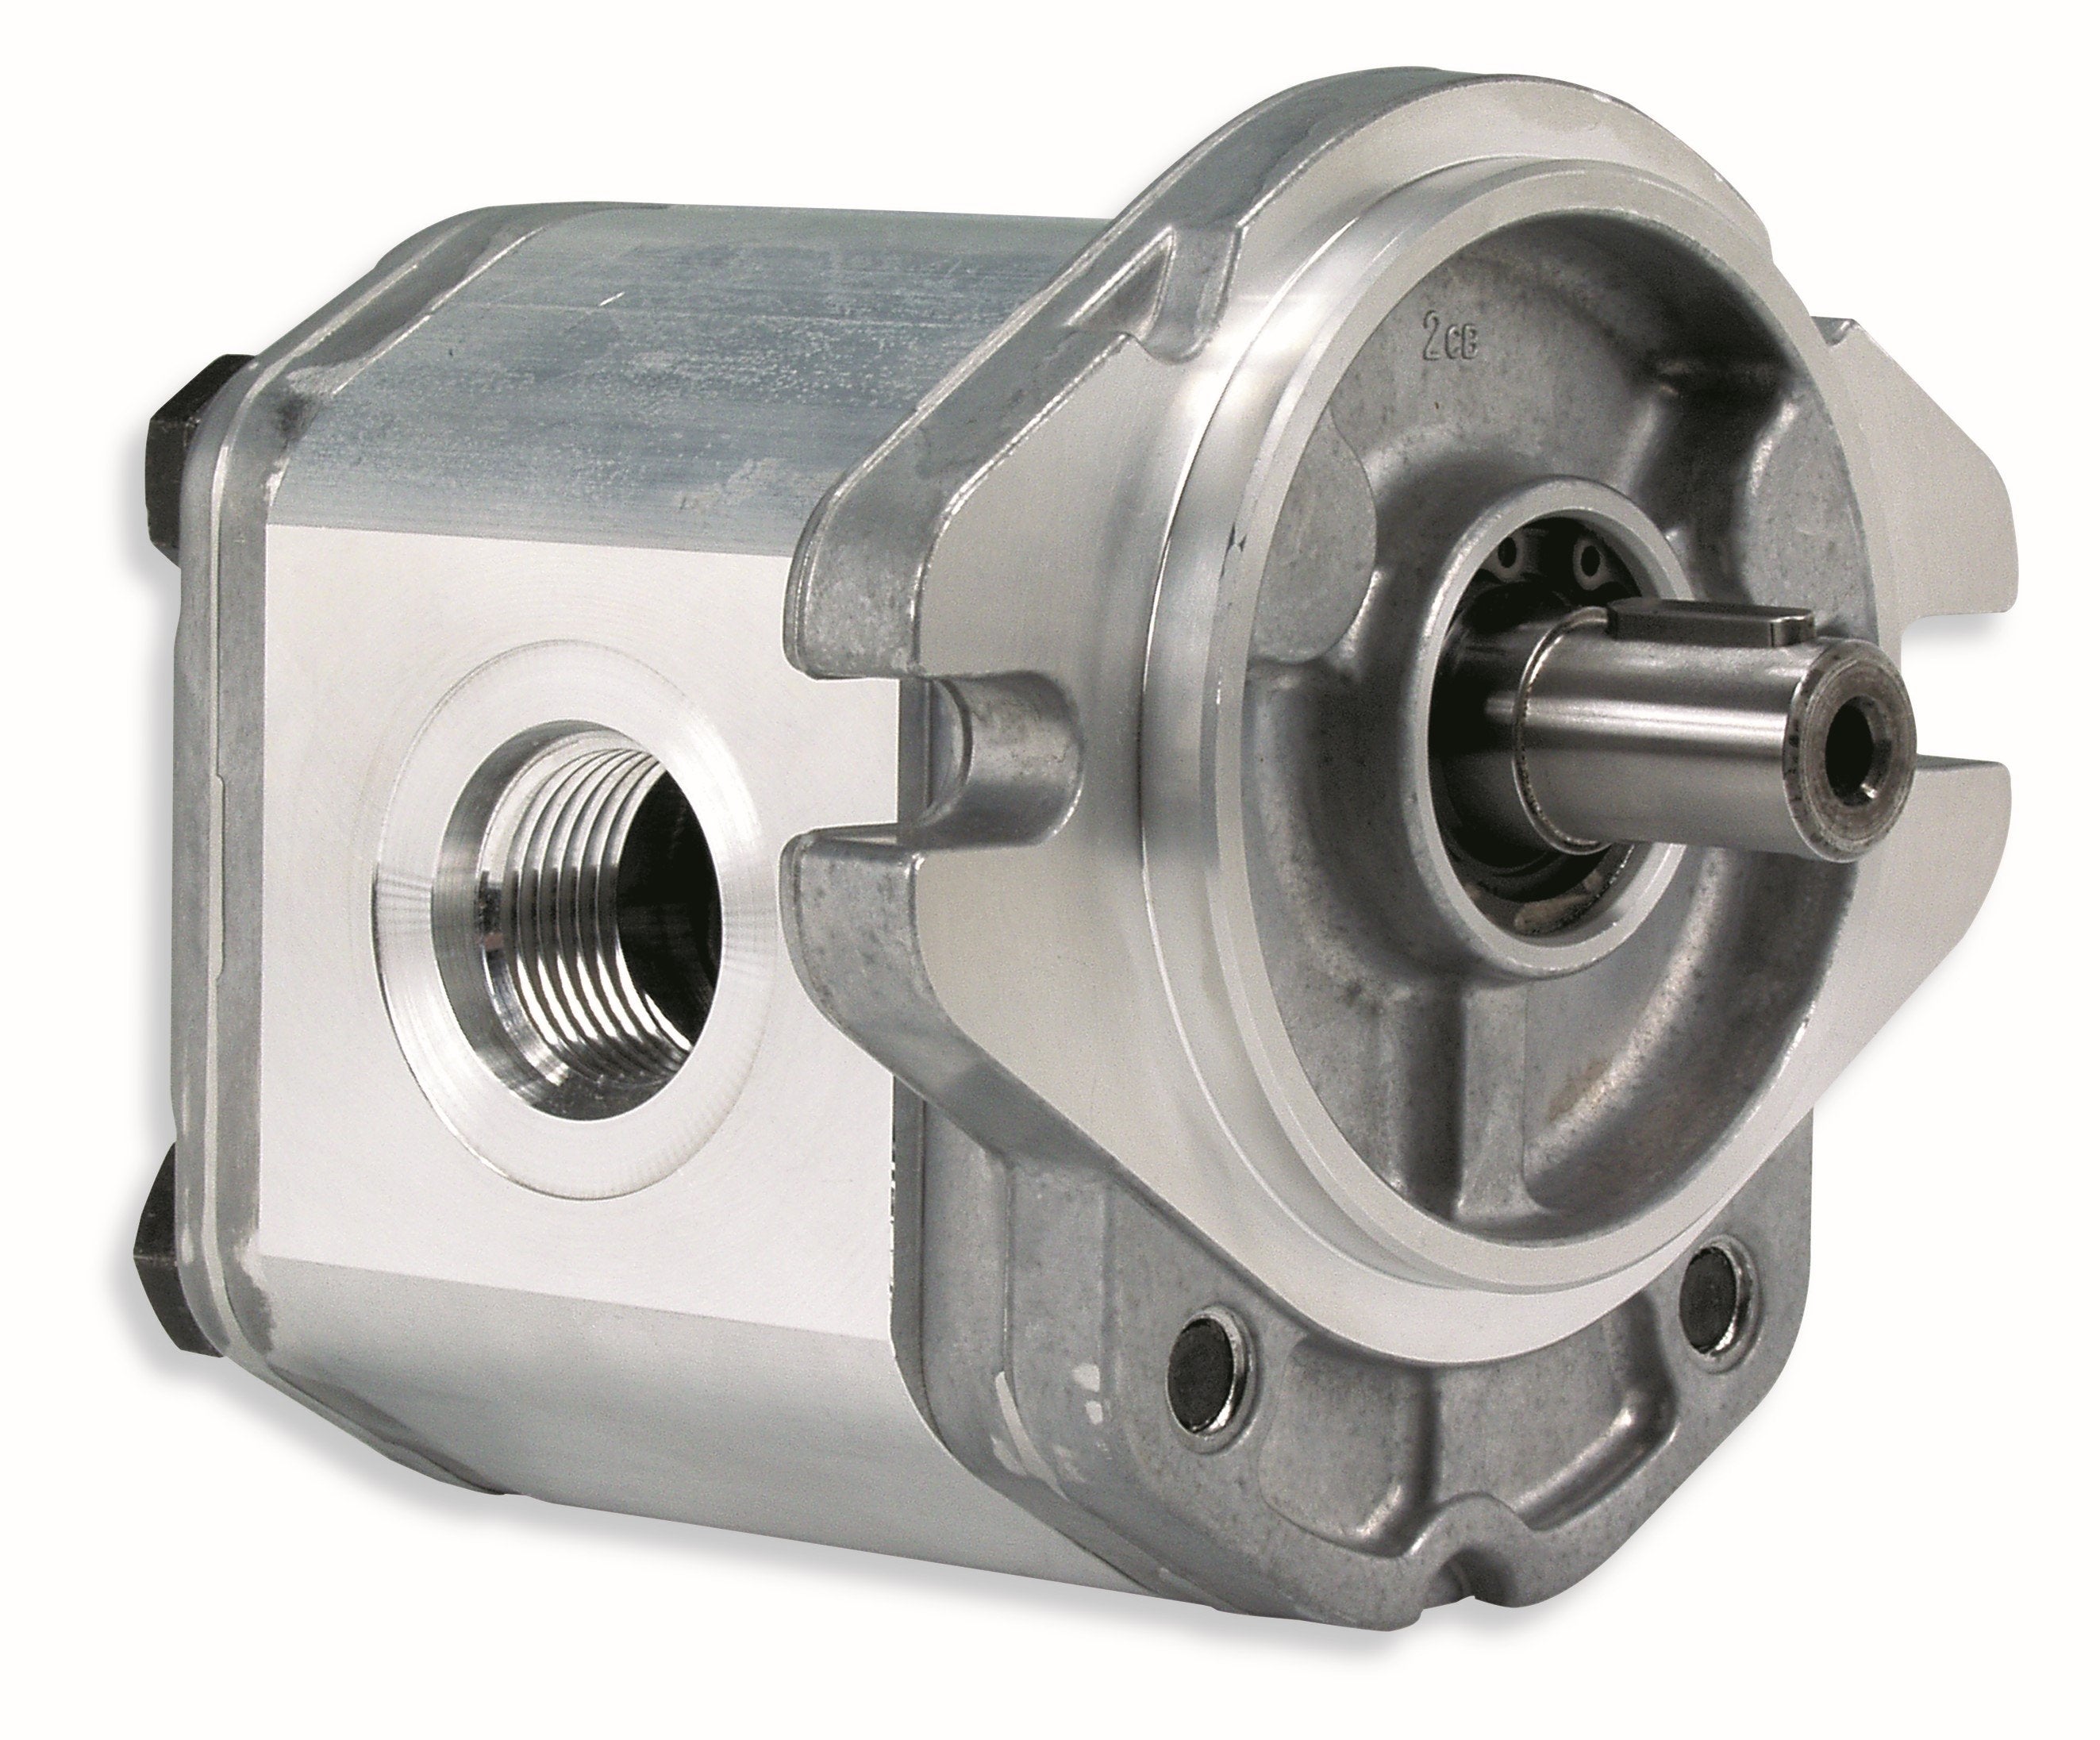 GHM3A-R-135-S1-FA-E4 : Marzocchi Gear Motor, Bidirectional, 87cc, 2320psi rated, 2000RPM, 1.5" #24 SAE ports, 13T 16/32DP Splined Shaft